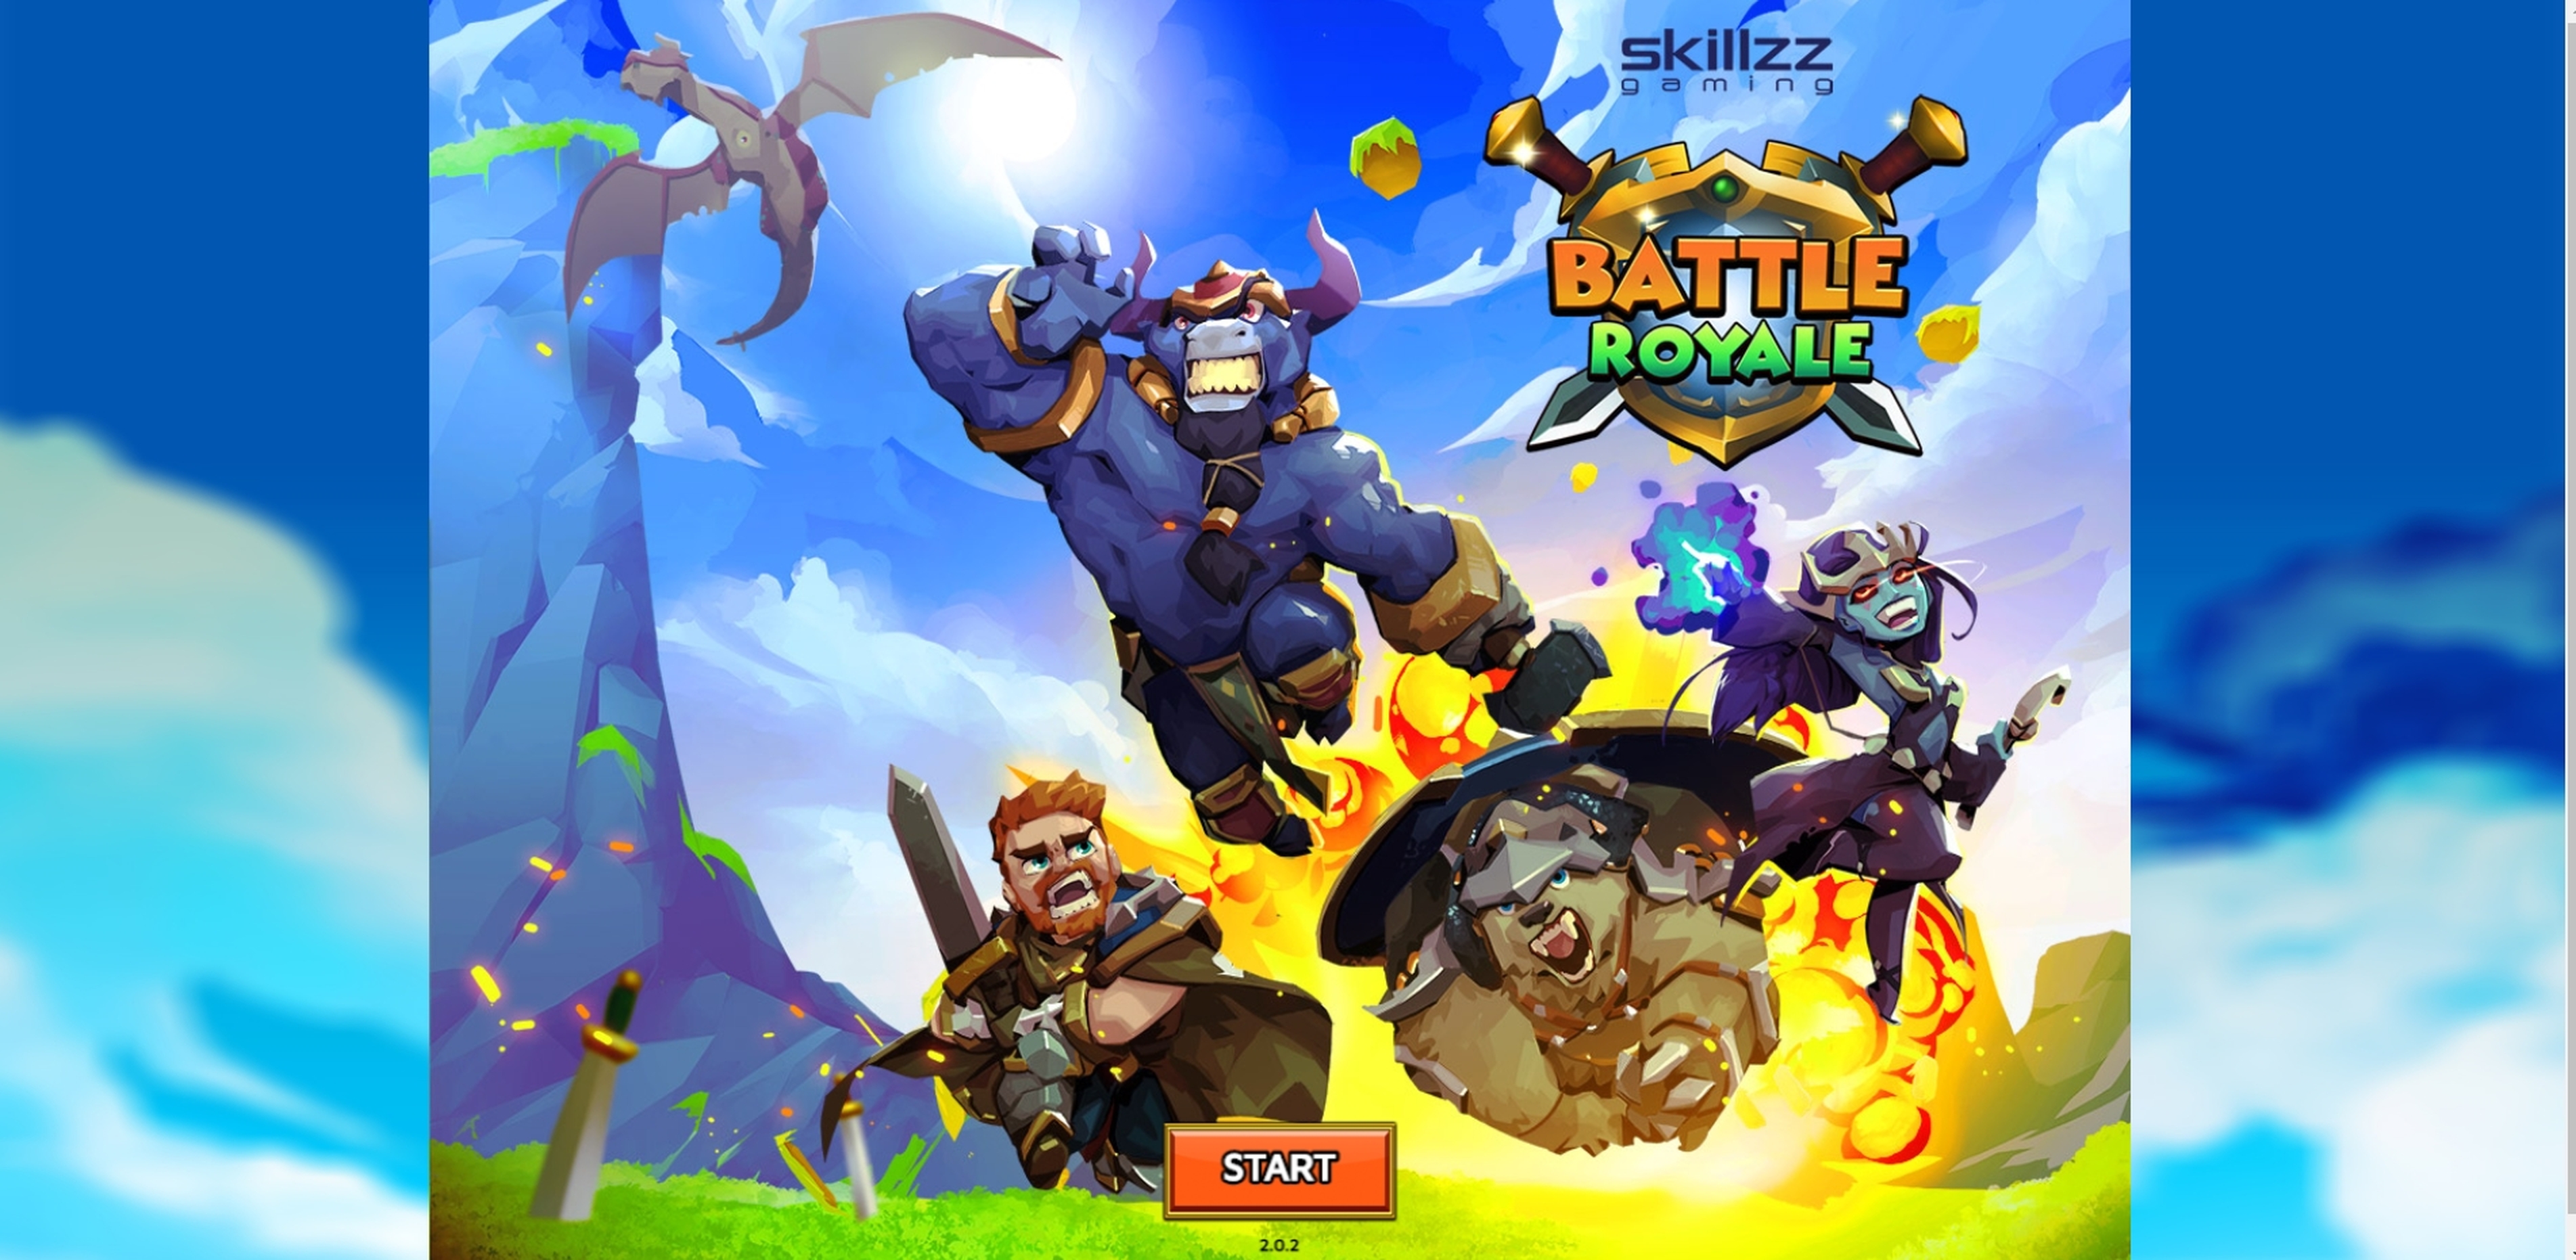 Play Battle Royale Free Casino Slot Game by Skillzzgaming